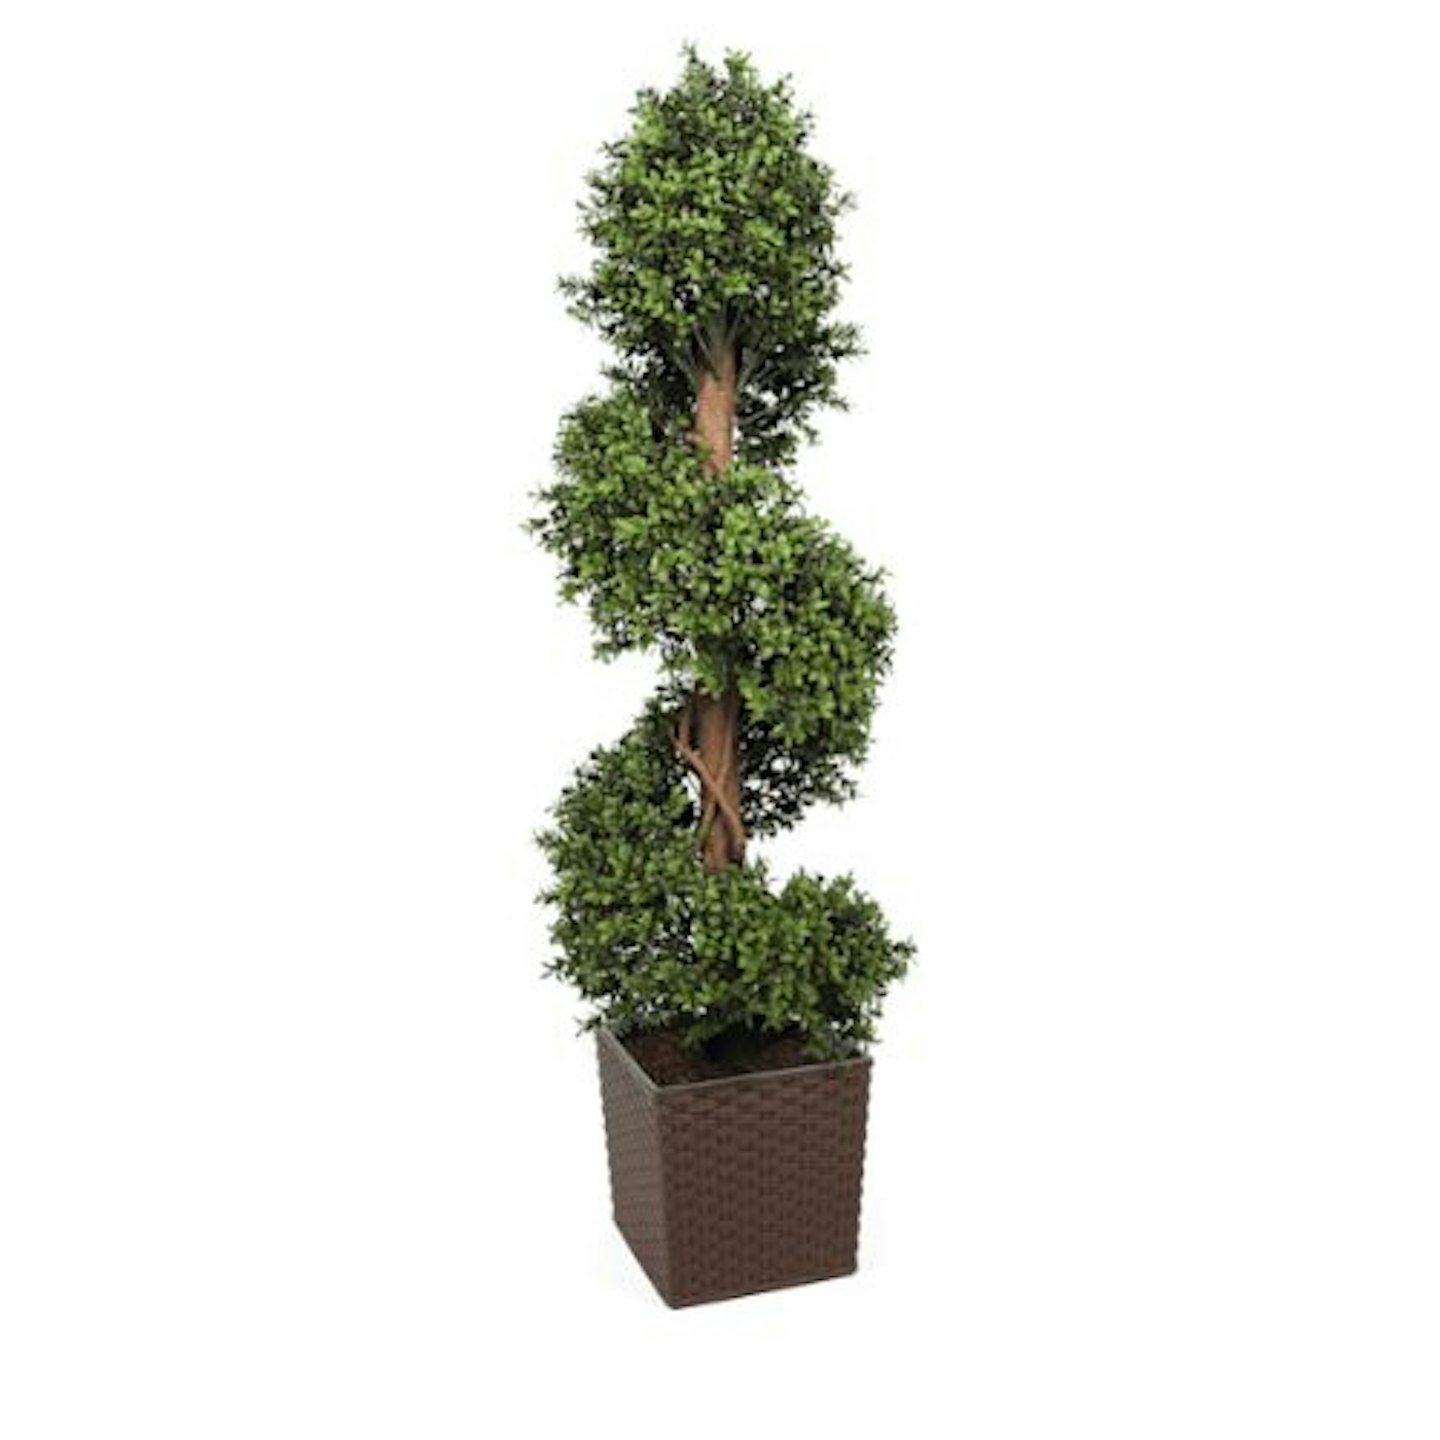 Artificial Topiary Buxus Spiral